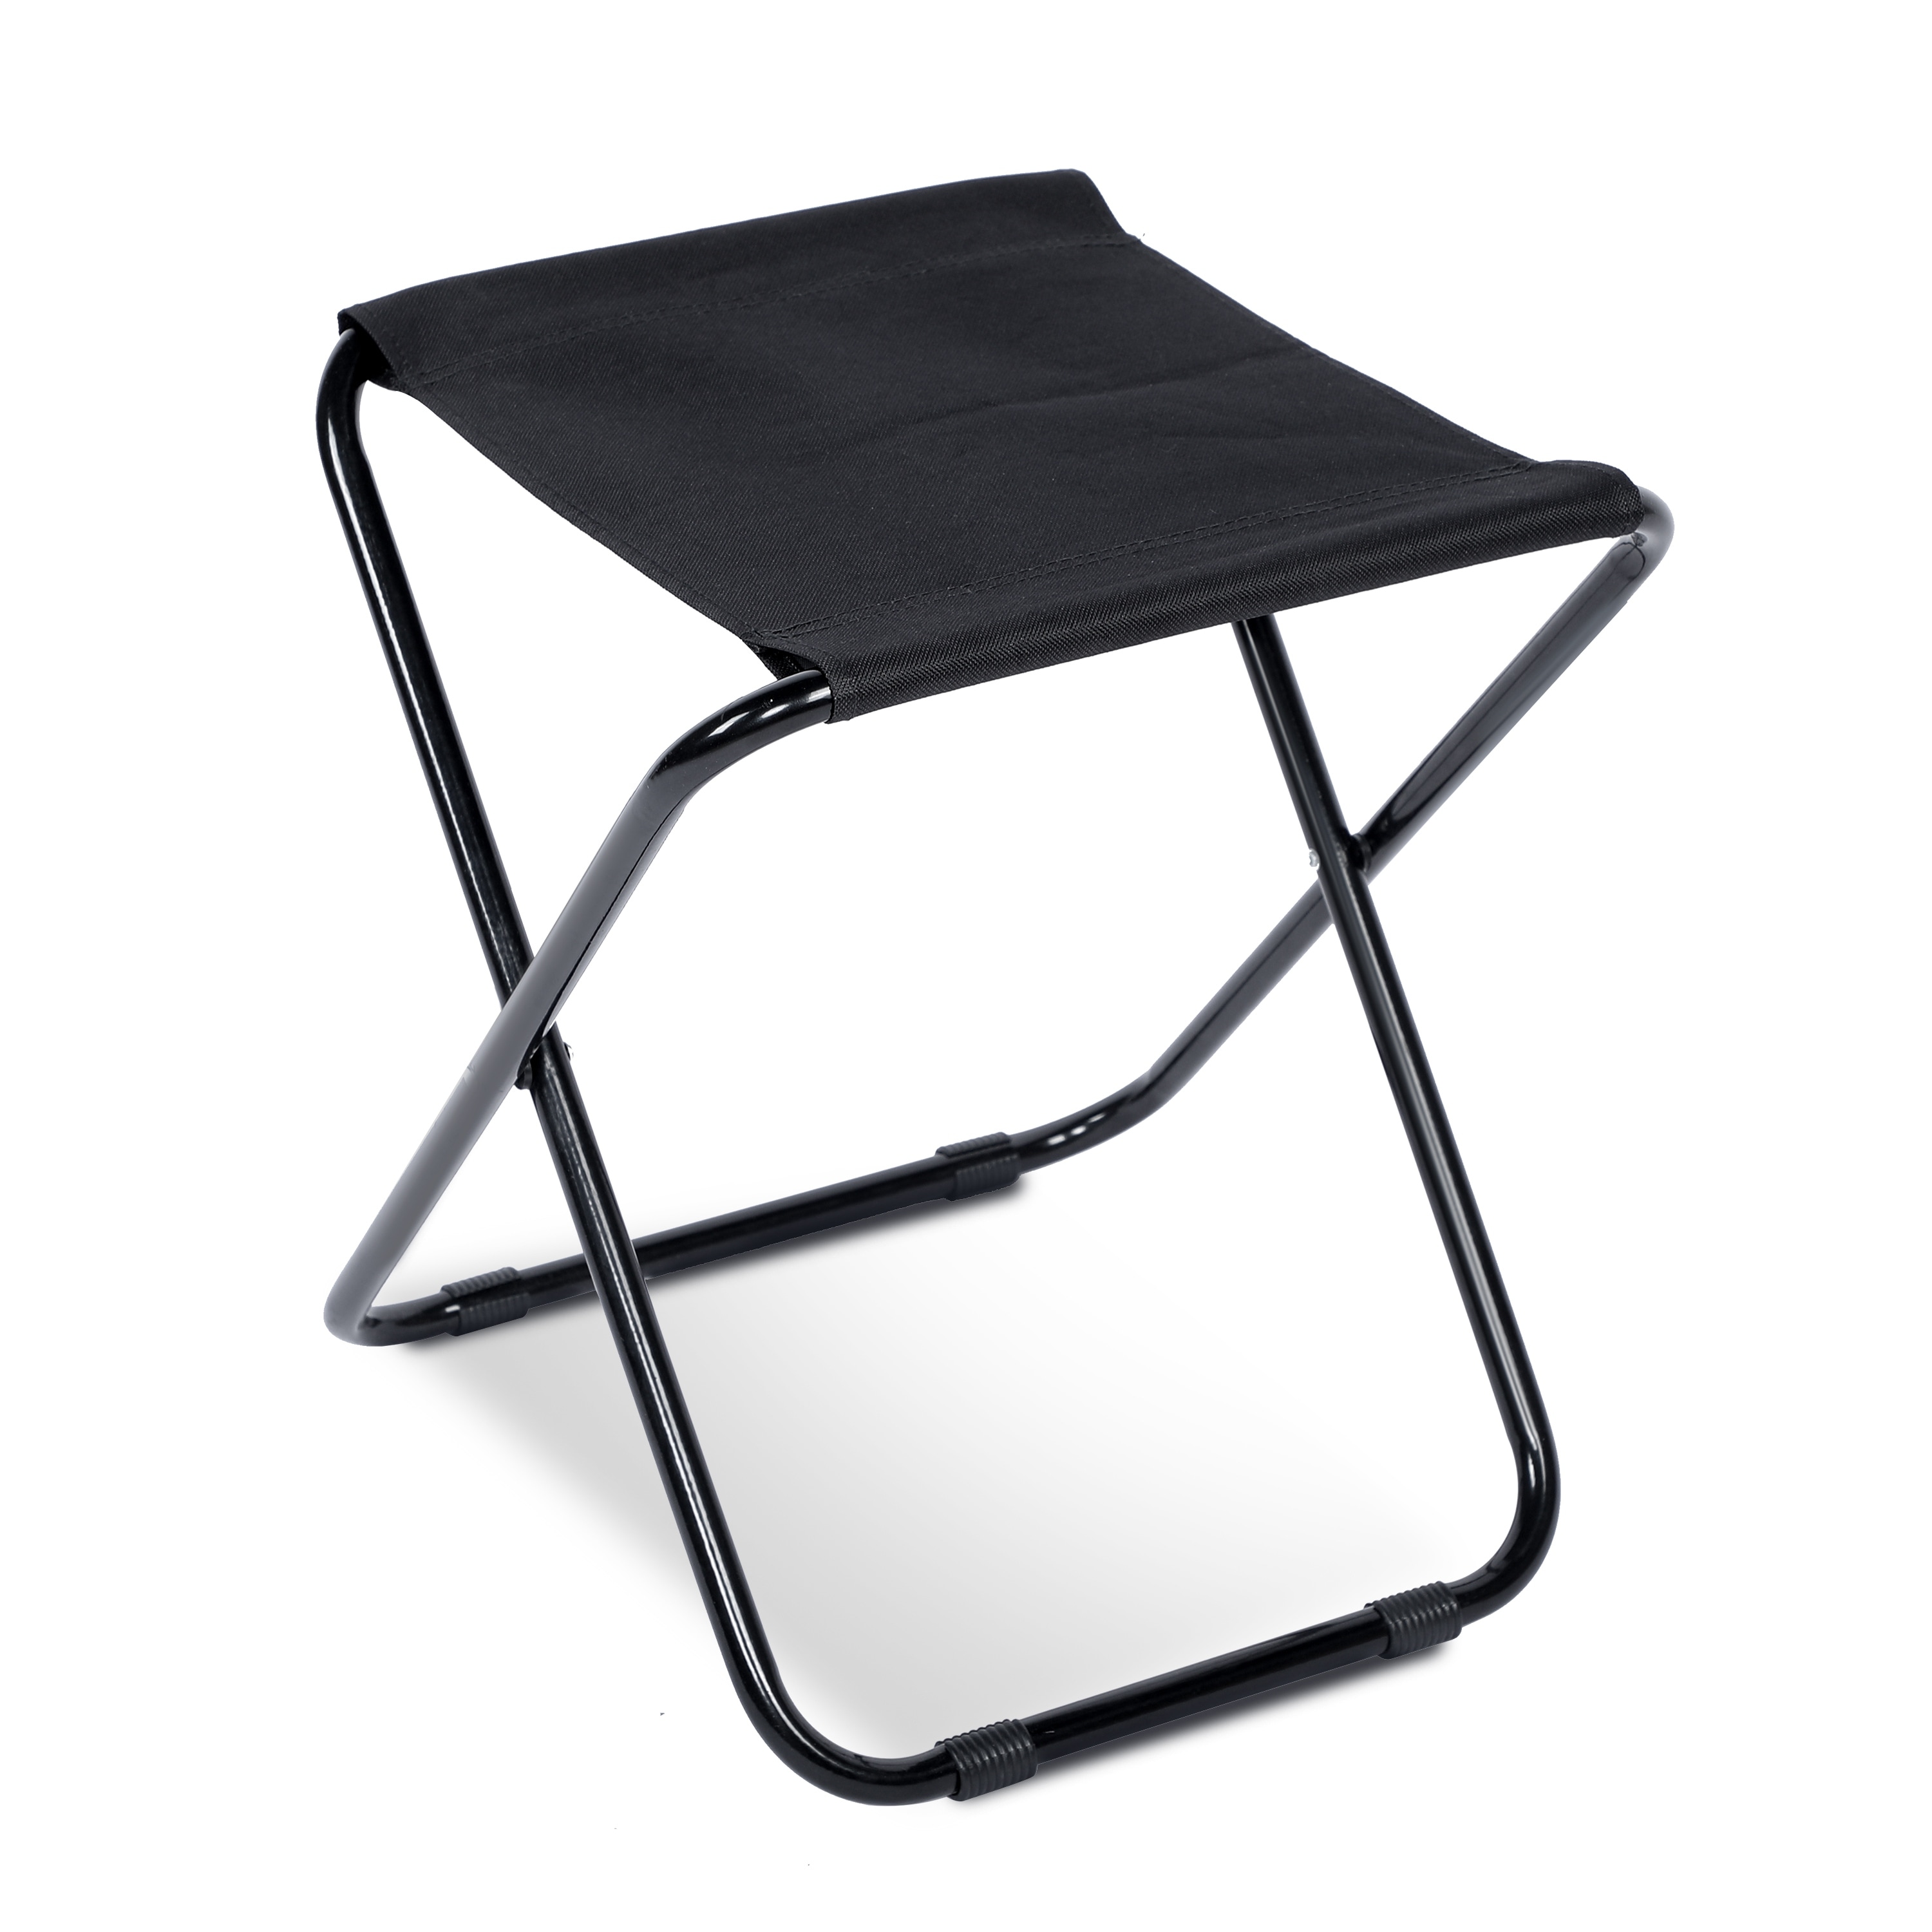 Folding Camping Stool  Portable Collapsible Camp Stool  Folding Foot Rest For Lightweight Compact Chair